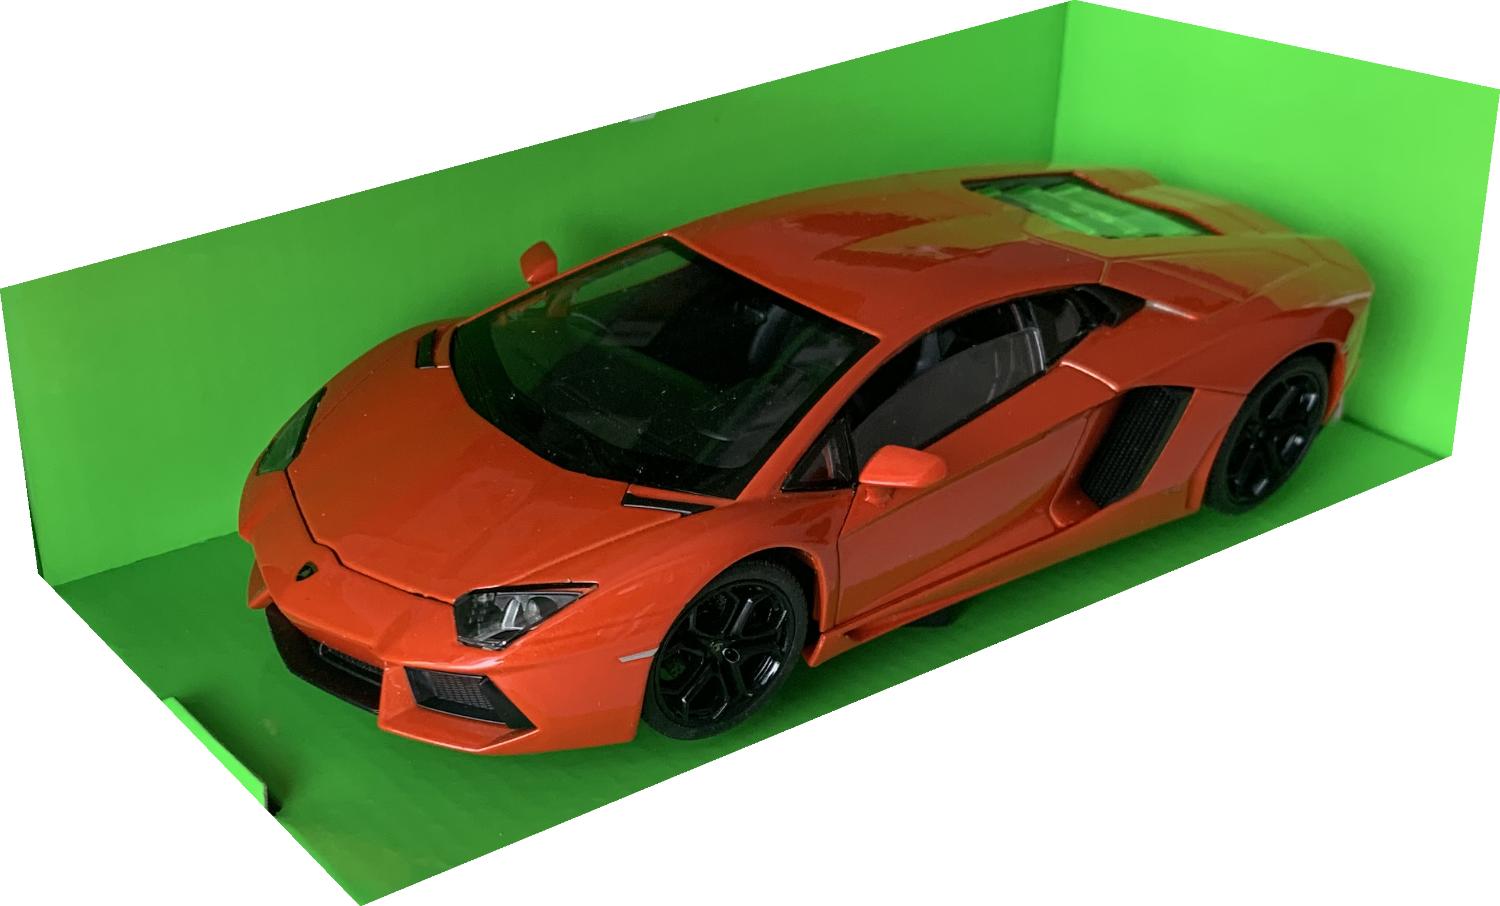 An excellent scale model of a Lamborghini Aventador LP700-4 Coupe decorated in orange with black wheels